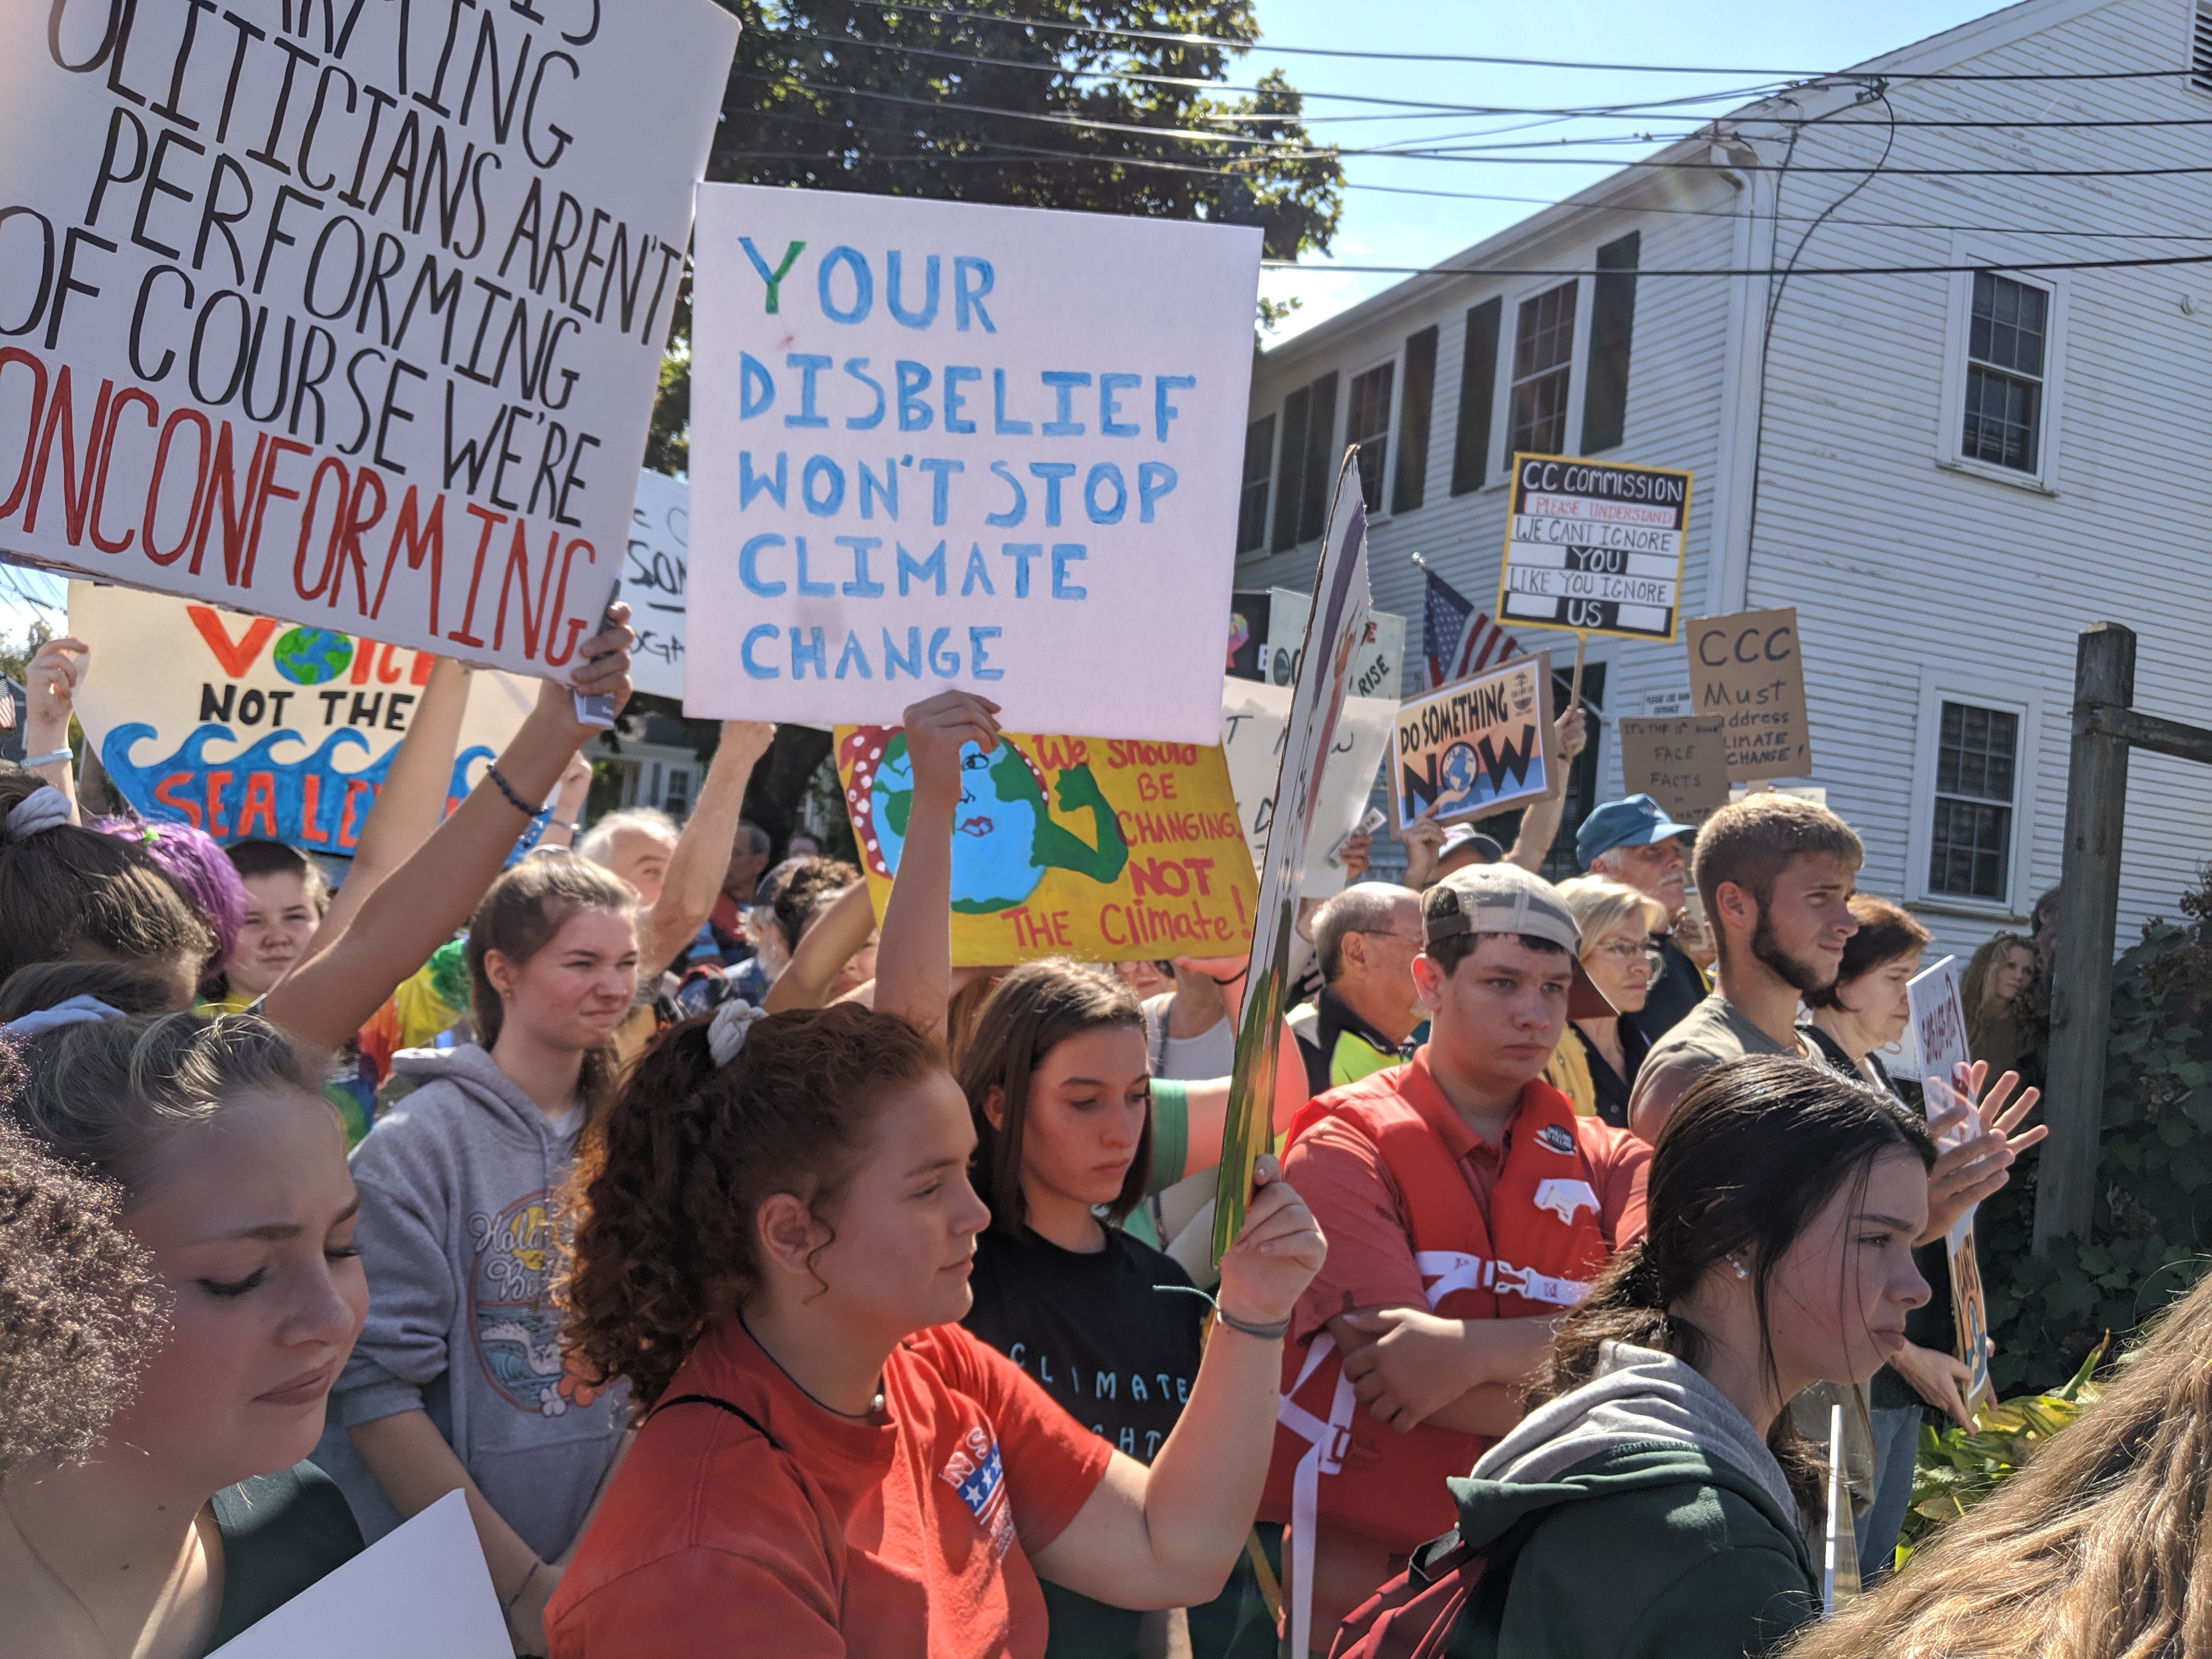 Students at the Dennis Glbal Climate March. sign reads "Your disbelief won't stop climate change".